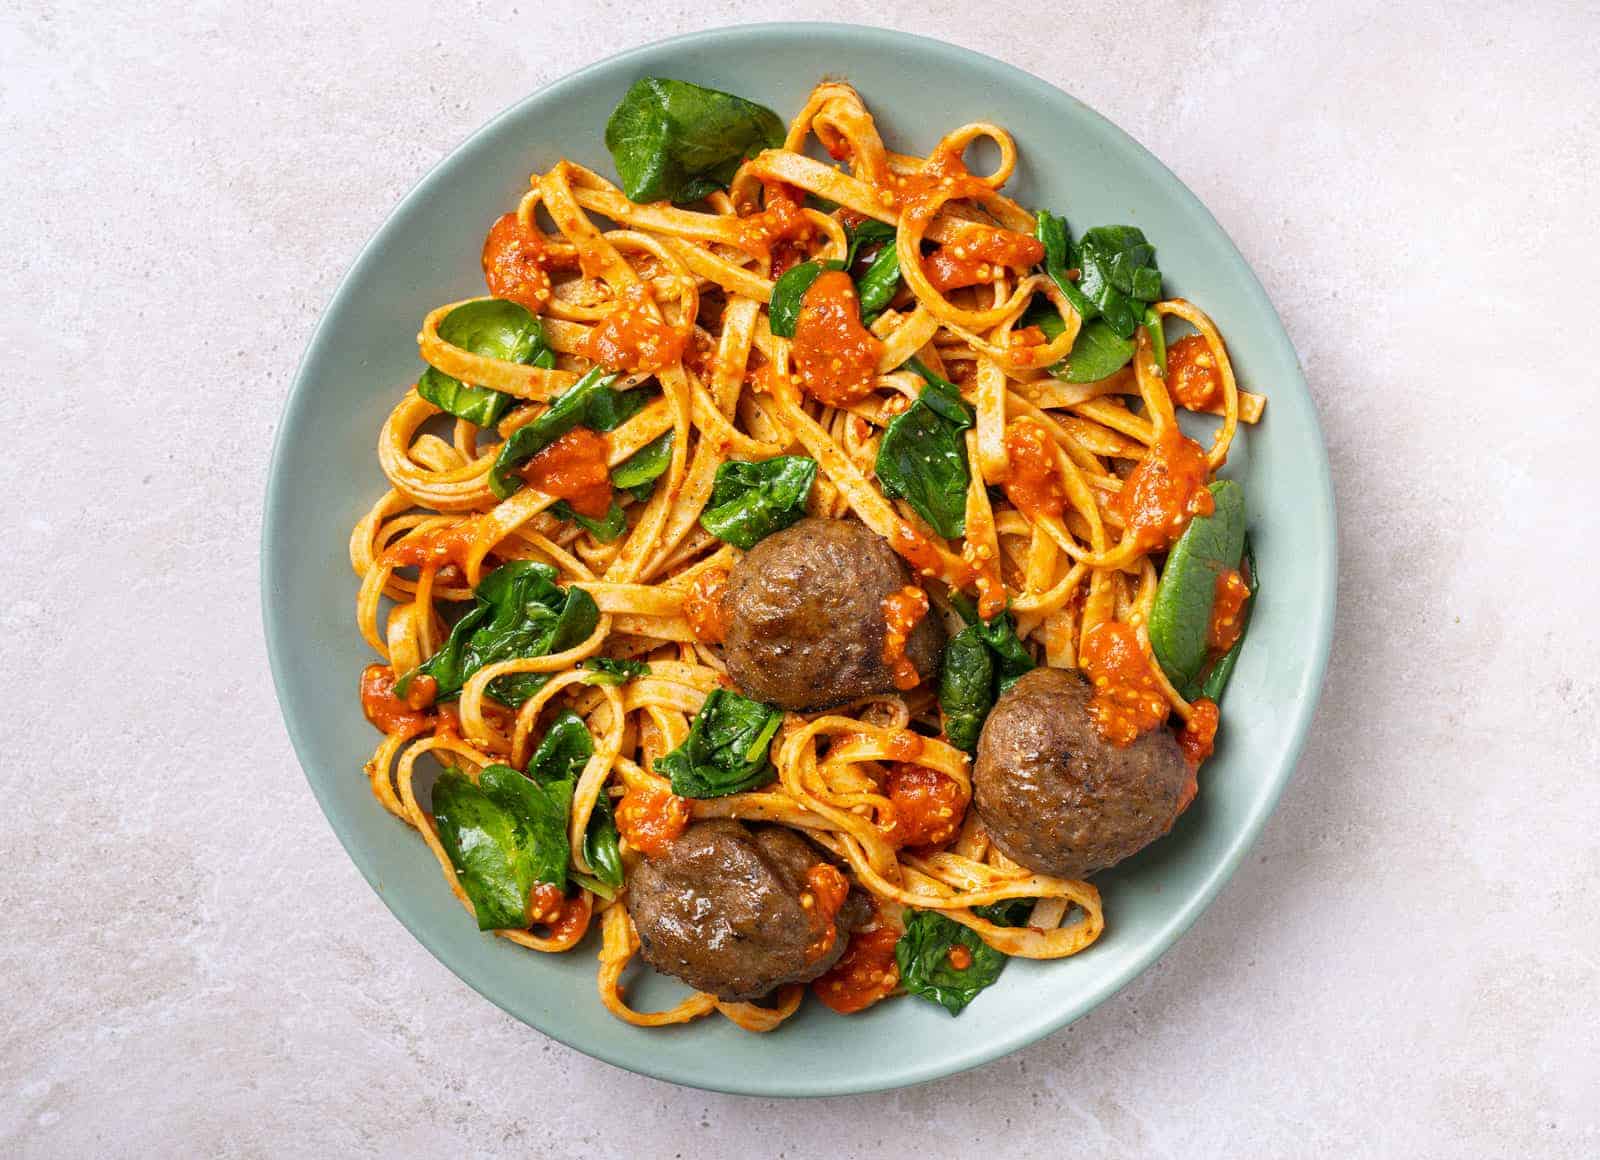 A Hungryroot dish of beef meatballs on a tomatoey linguine with spinach mixed in.